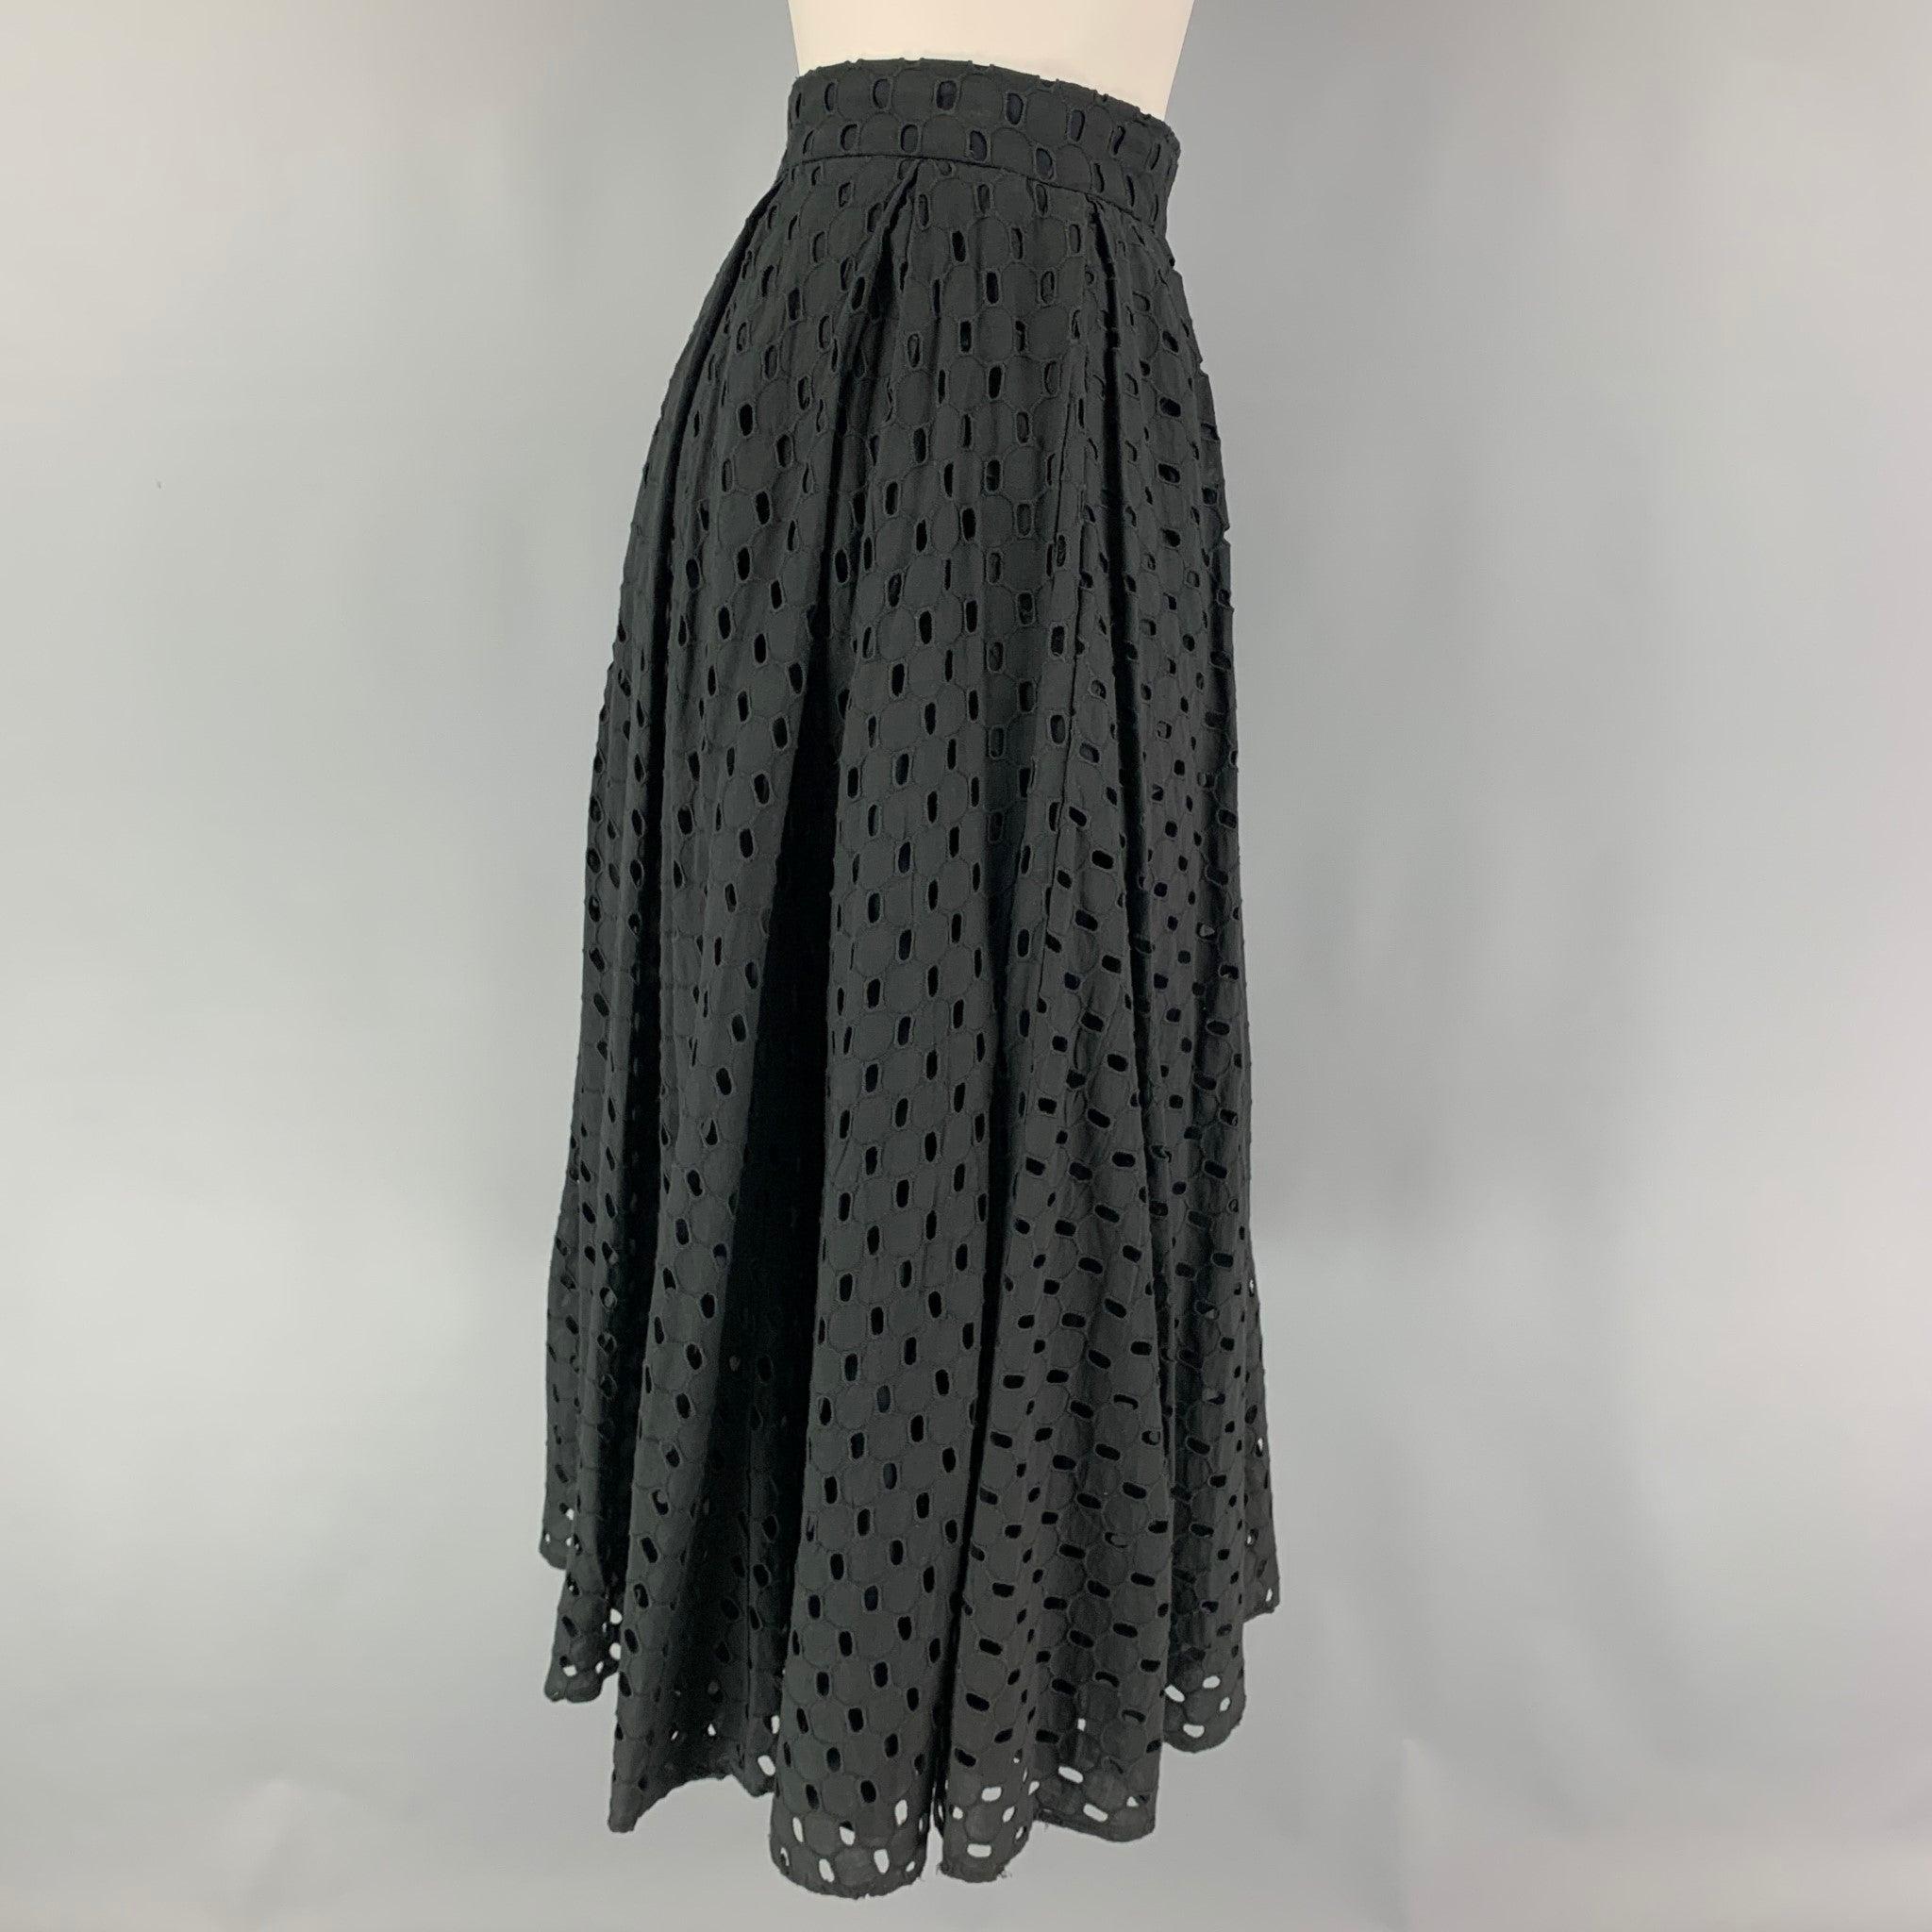 MOSCHINO Size 8 Black Cotton Eyelet A-Line Skirt In Good Condition For Sale In San Francisco, CA